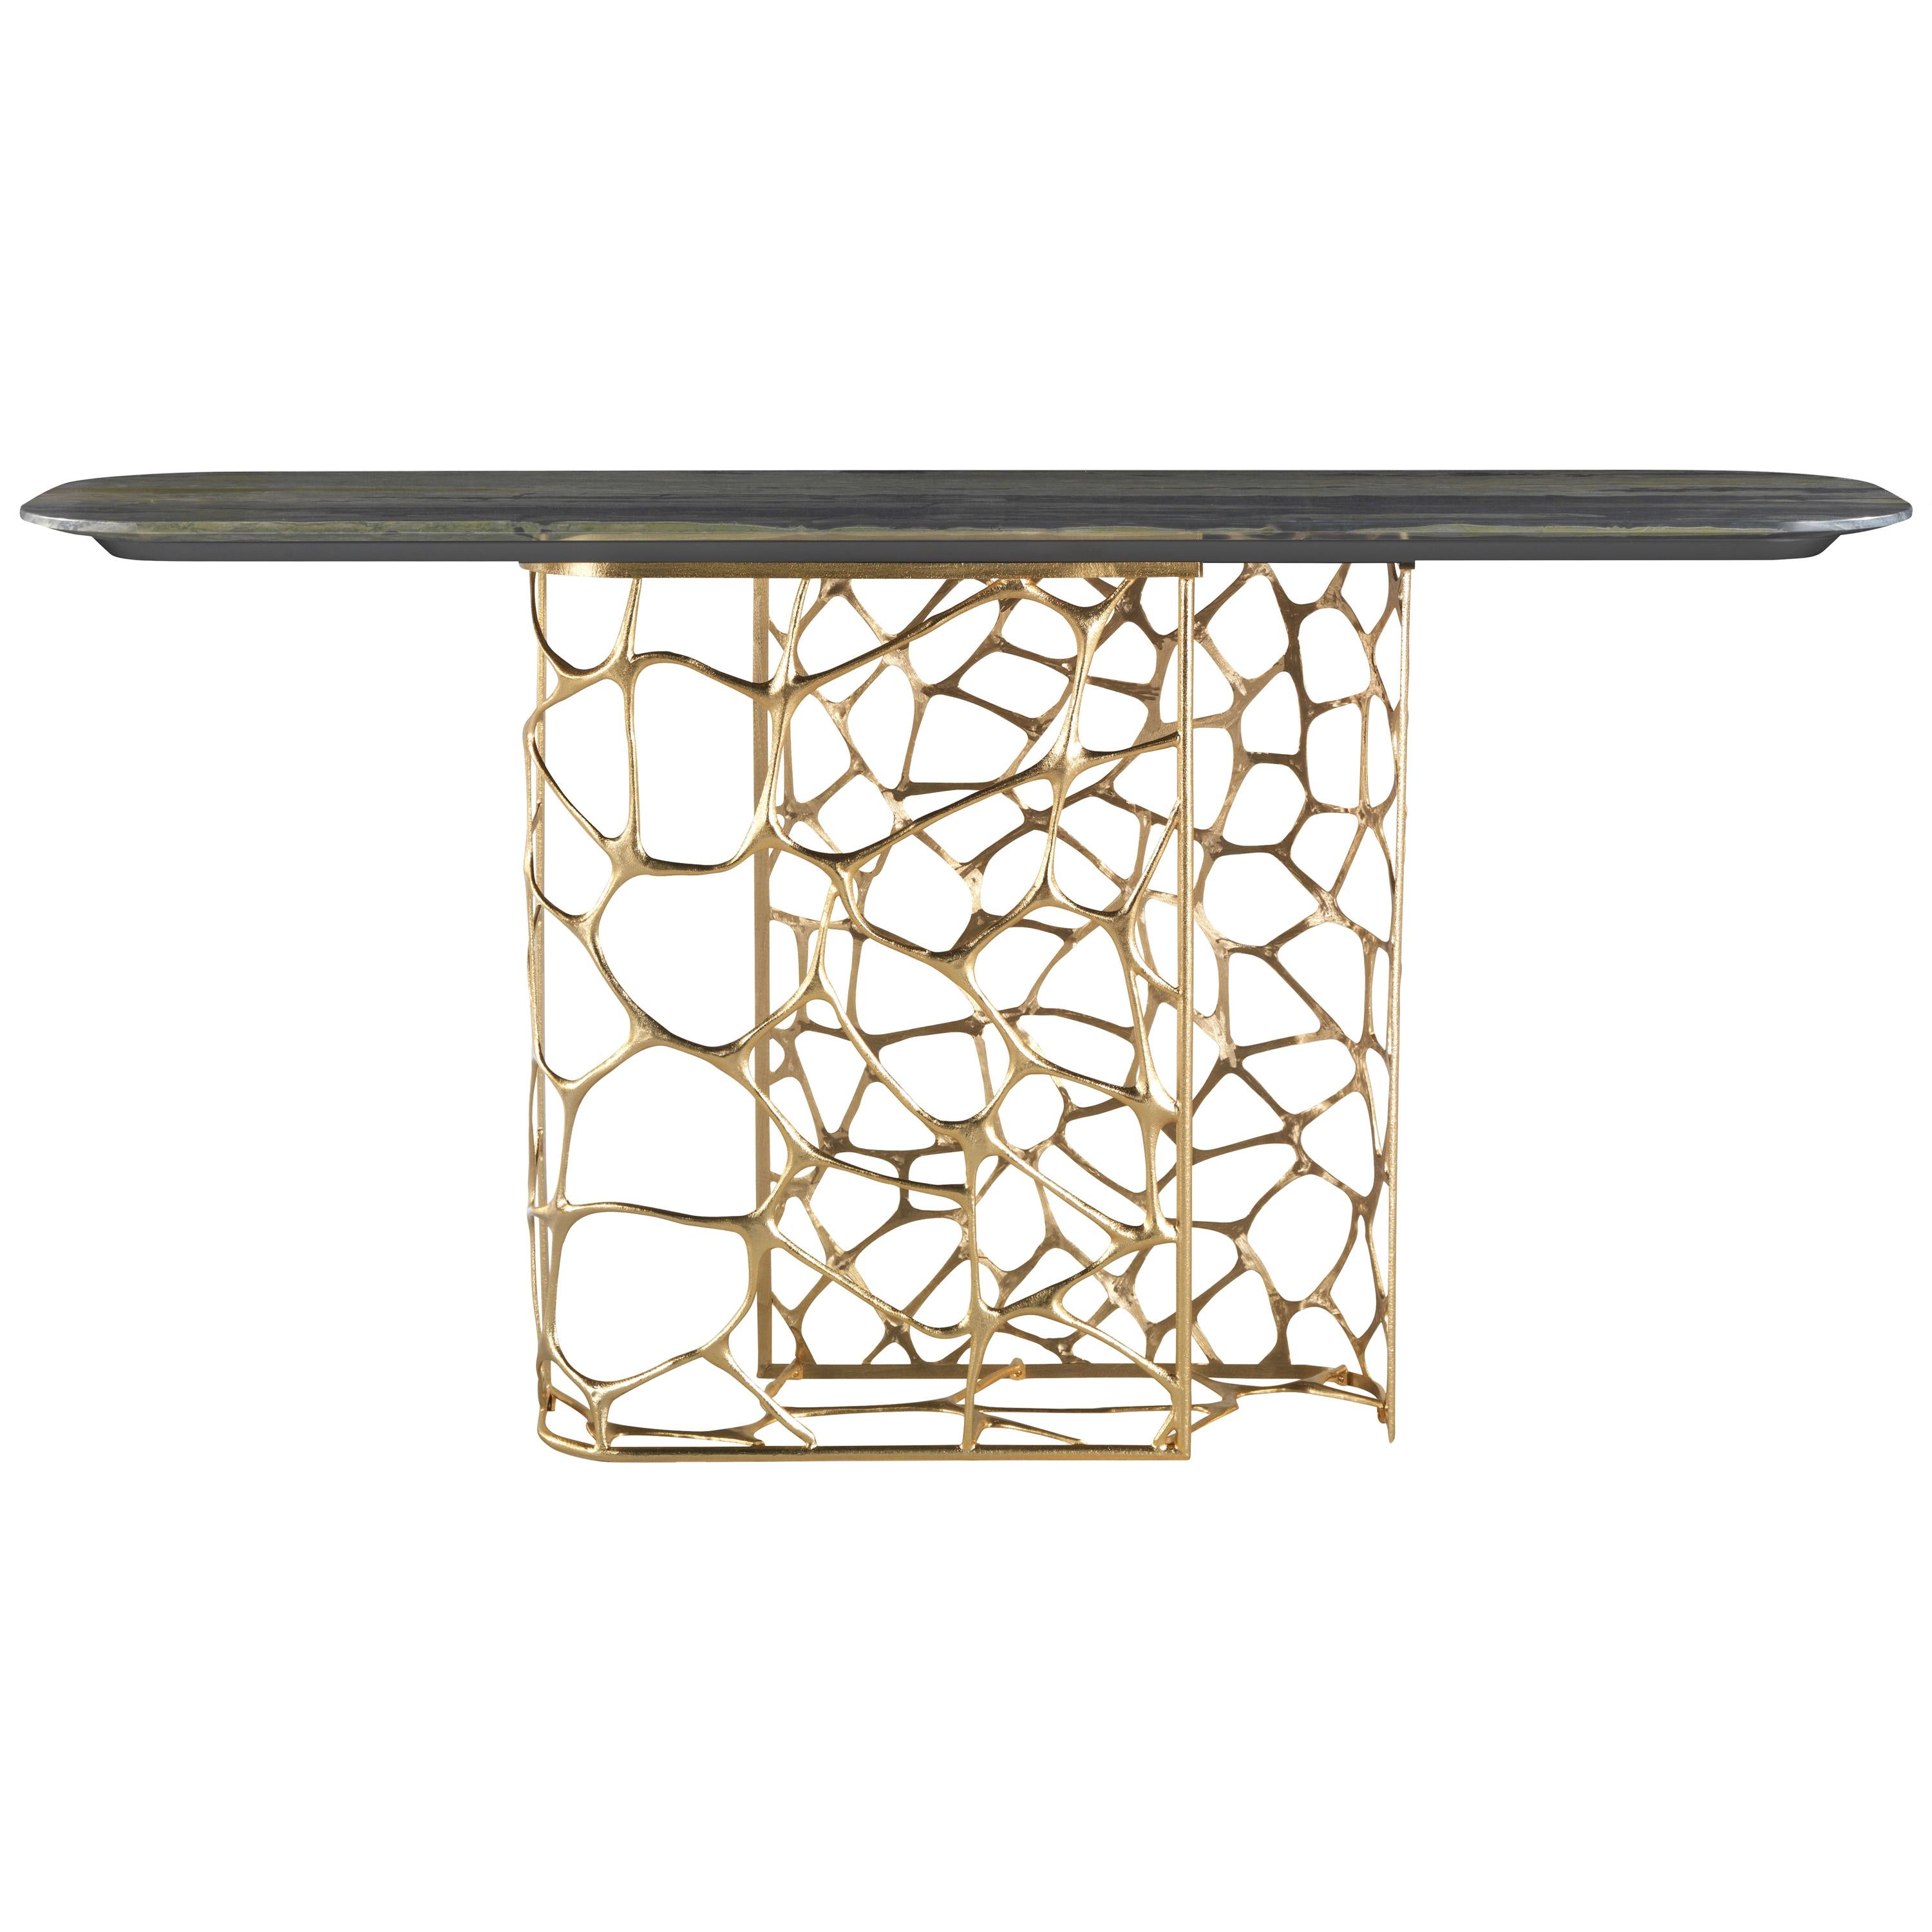 21st Century Sioraf Console with Marble Top by Roberto Cavalli Home Interiors